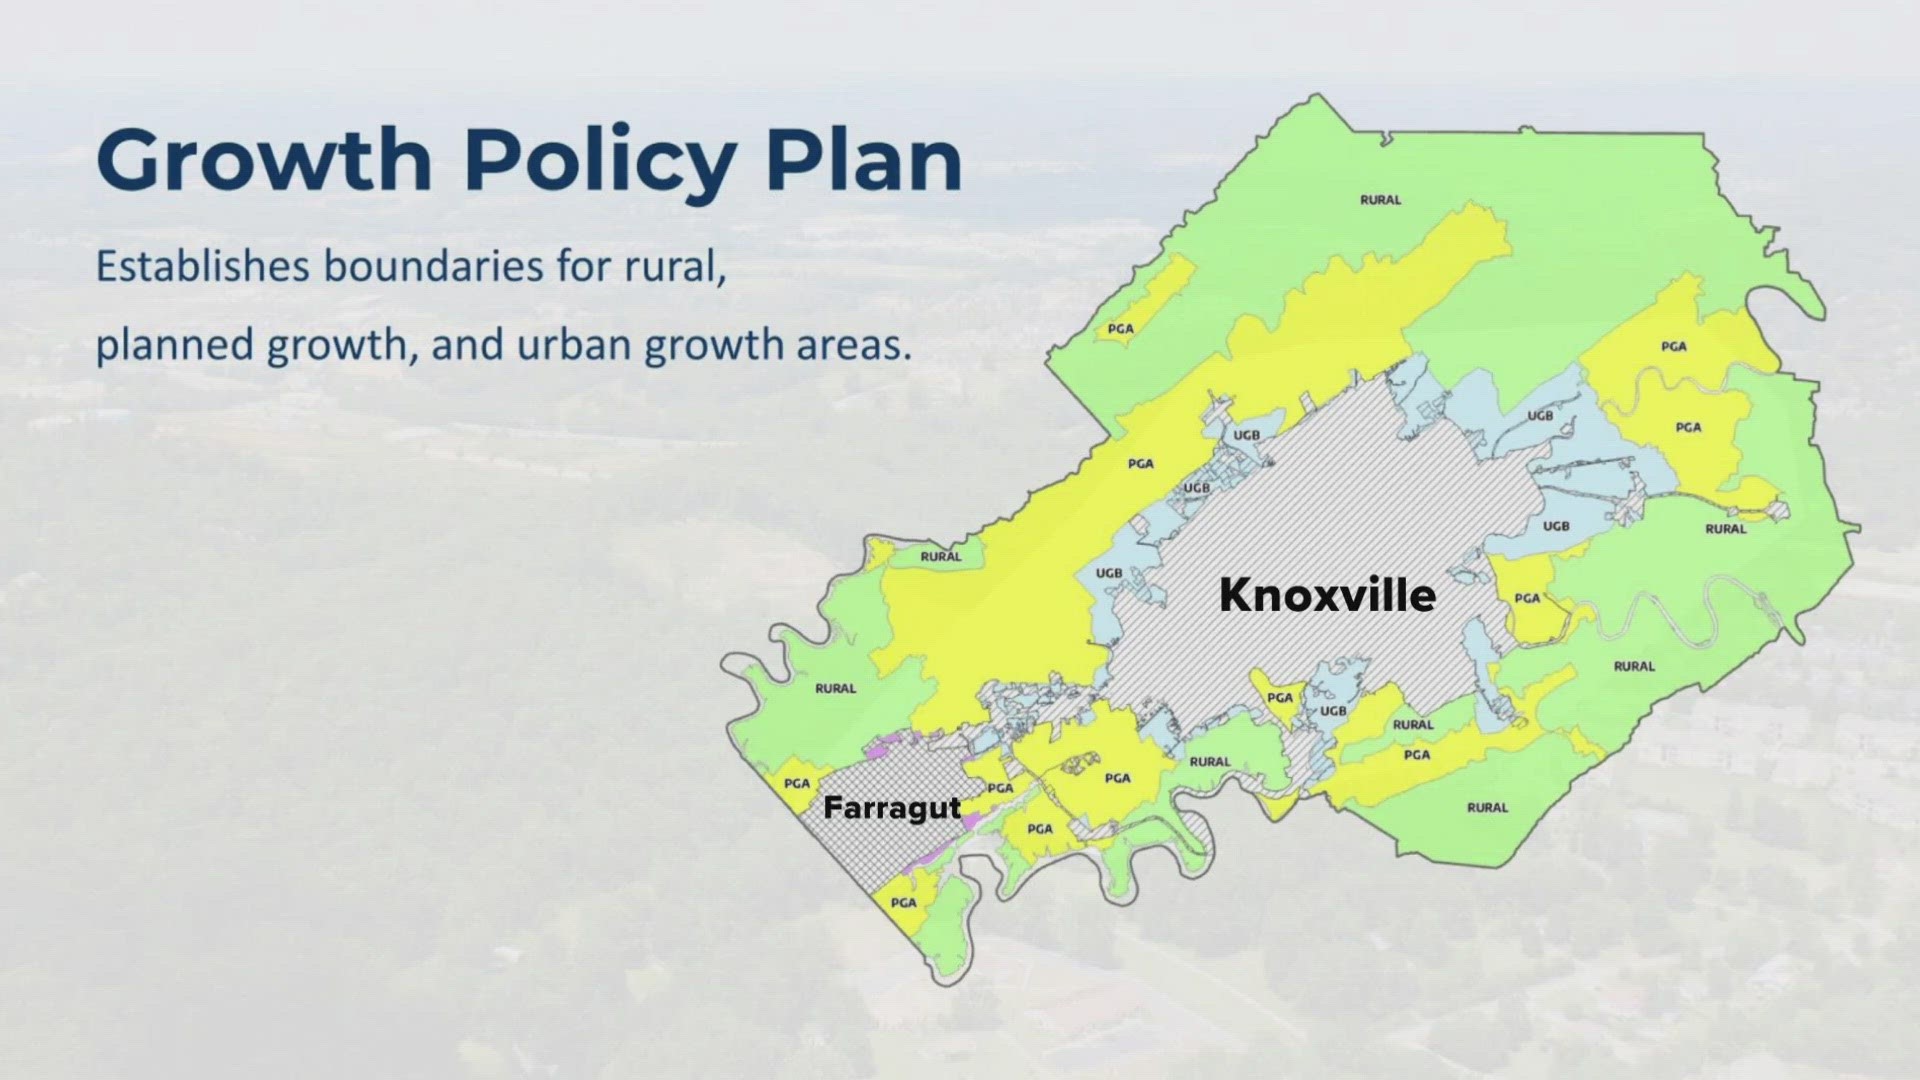 The Farragut Board of Mayor and Aldermen voted to tank Knox County's growth plan last week. Today, the board voted to reconsider the decision.